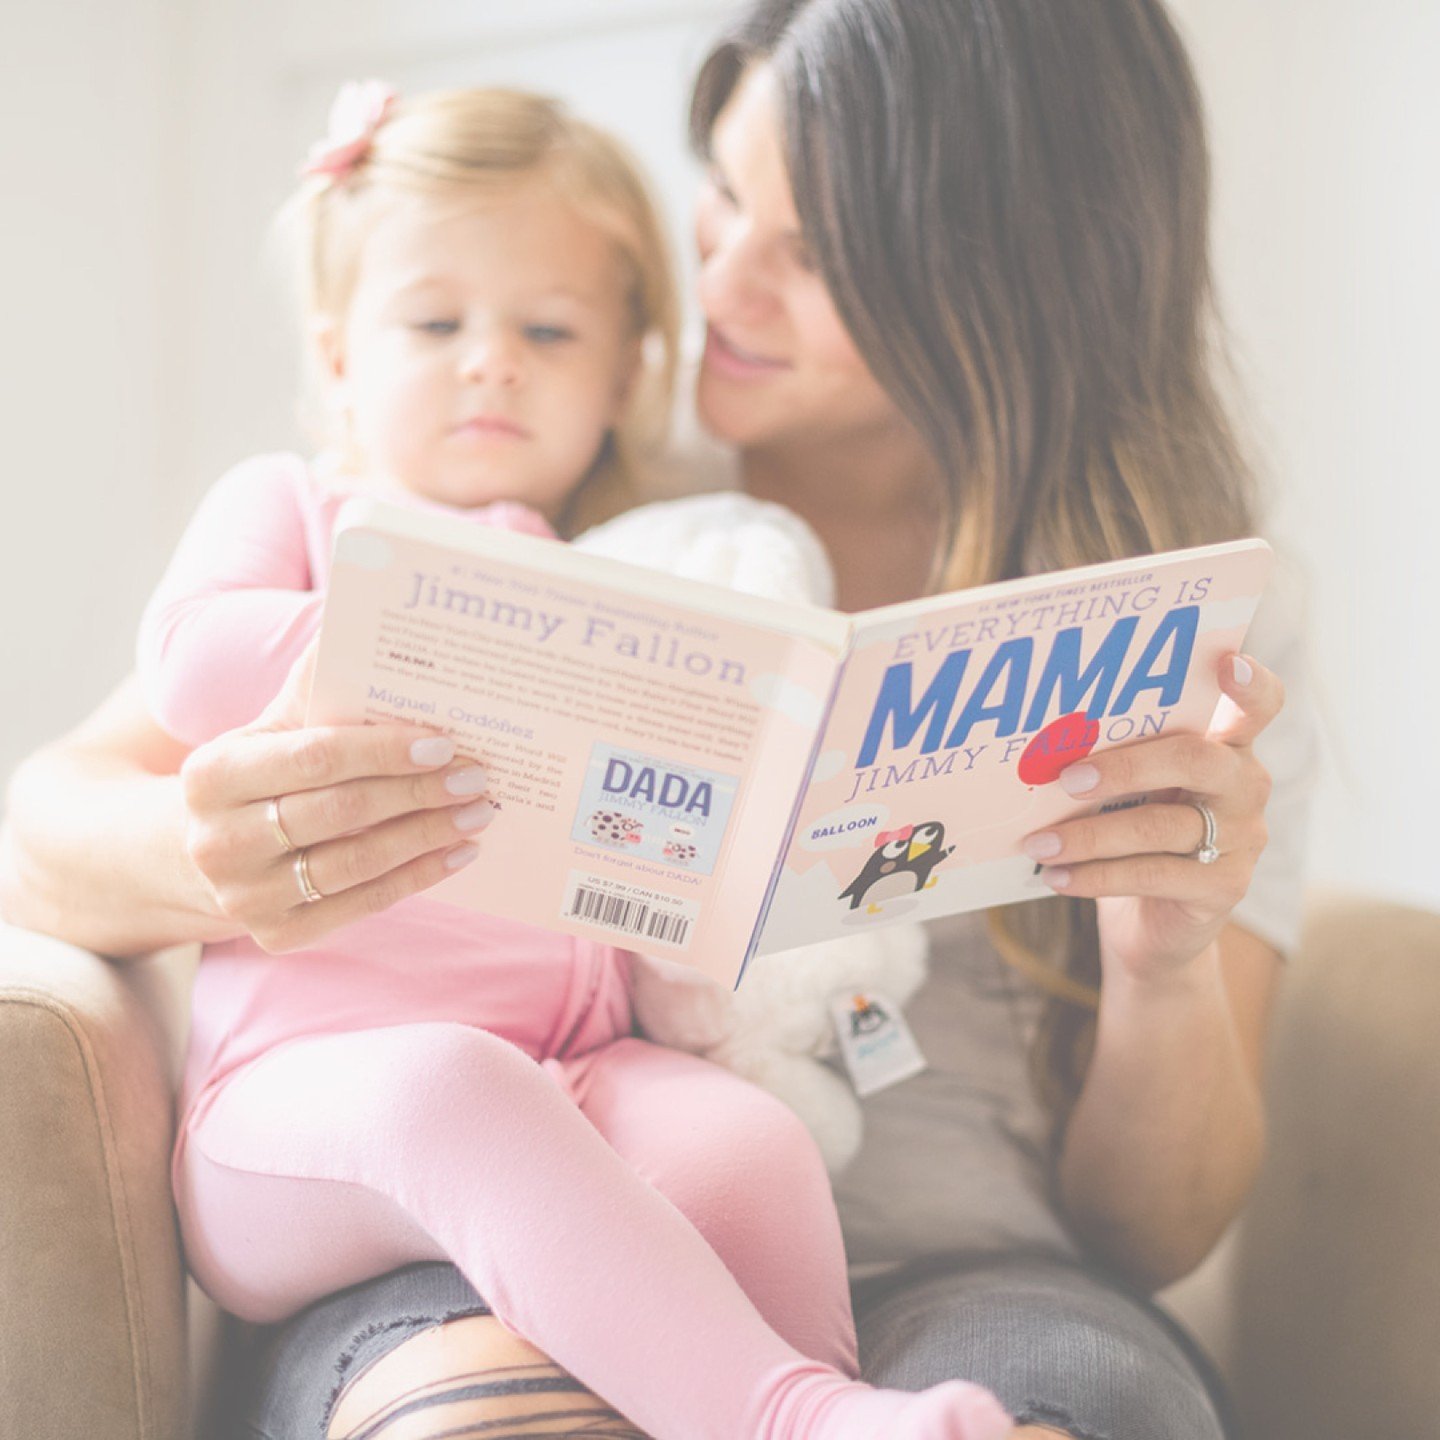 On this special day, I want to take a moment to celebrate the amazing mothers who make up this MBTB community. From the sleepless nights to the endless cuddles, you pour your heart and soul into nurturing your little ones every single day.

As a slee